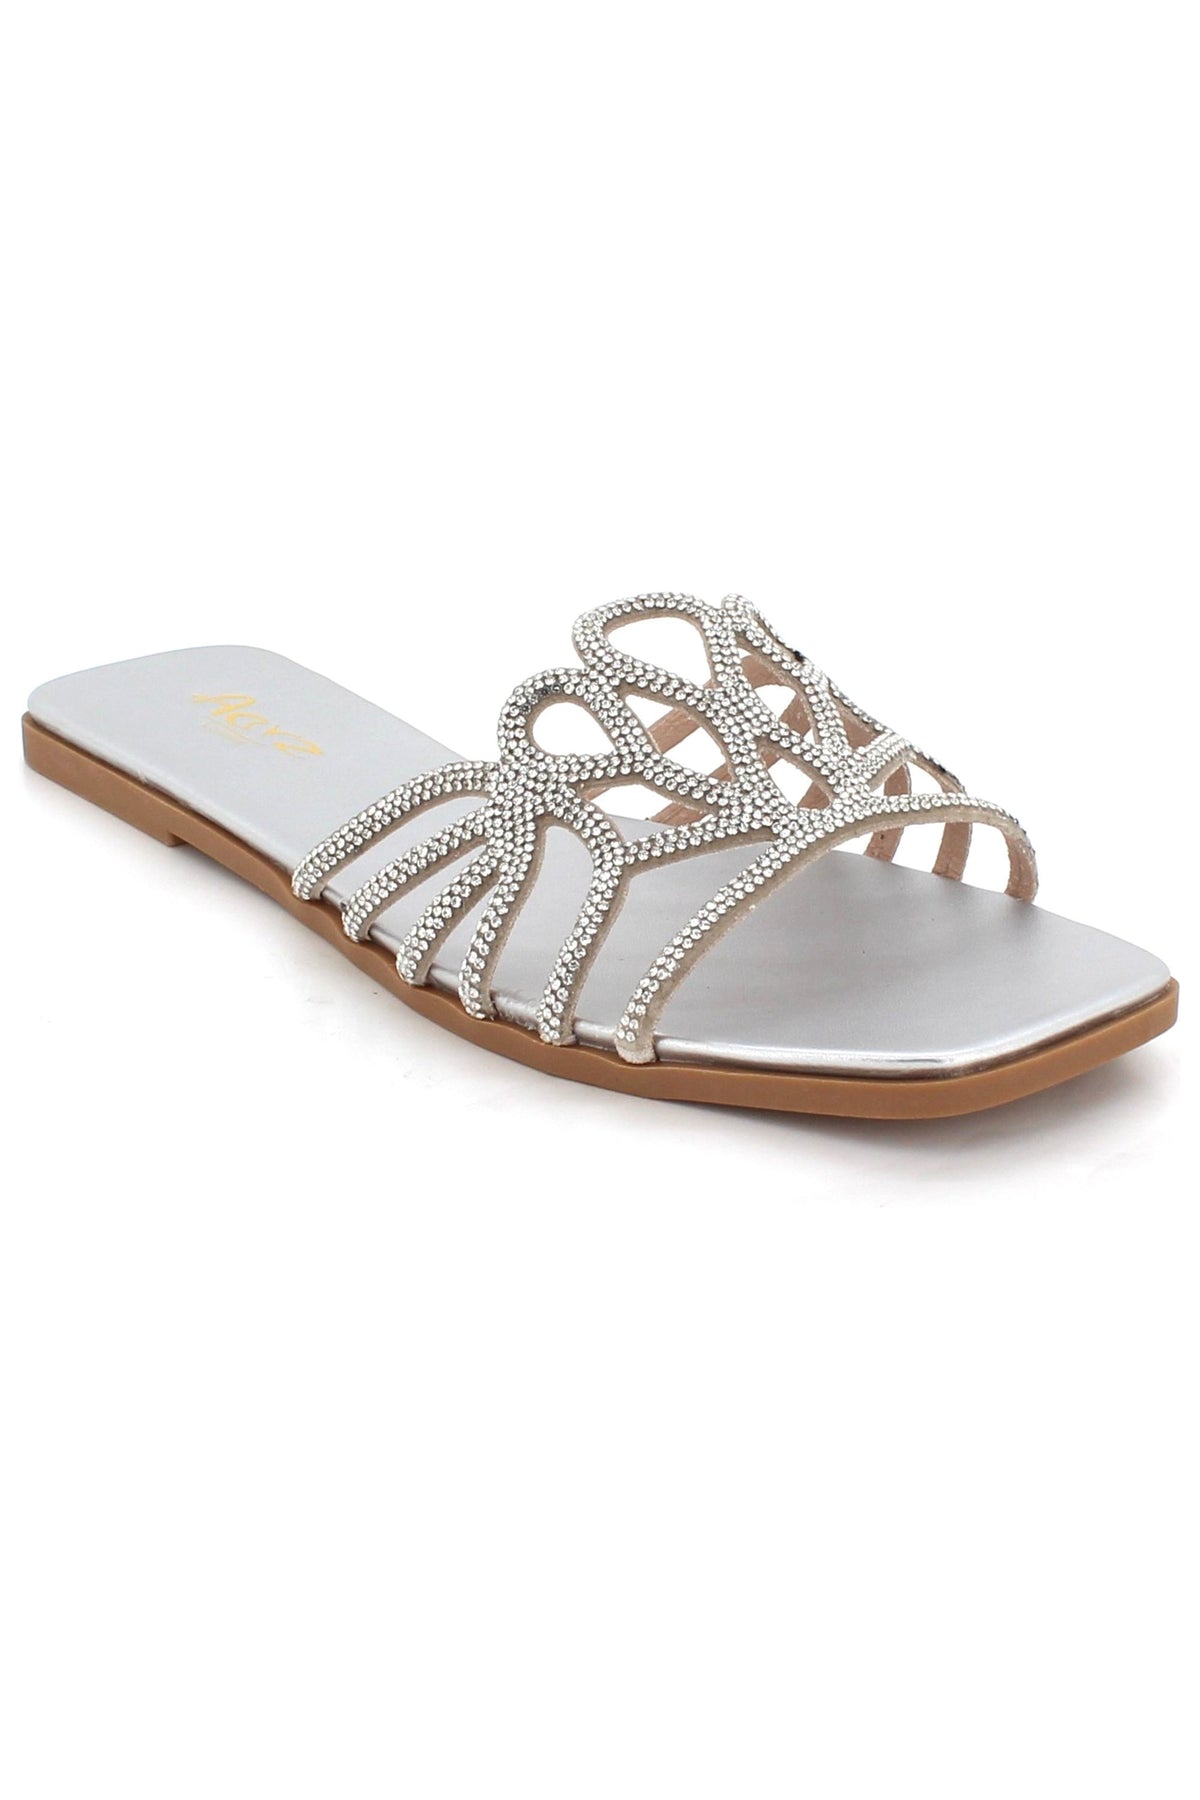 Elegantly Embellished Crystal Encrusted Design Open Toe Party Holiday Summer Beach Casual Comfort Flat Sandals L7580